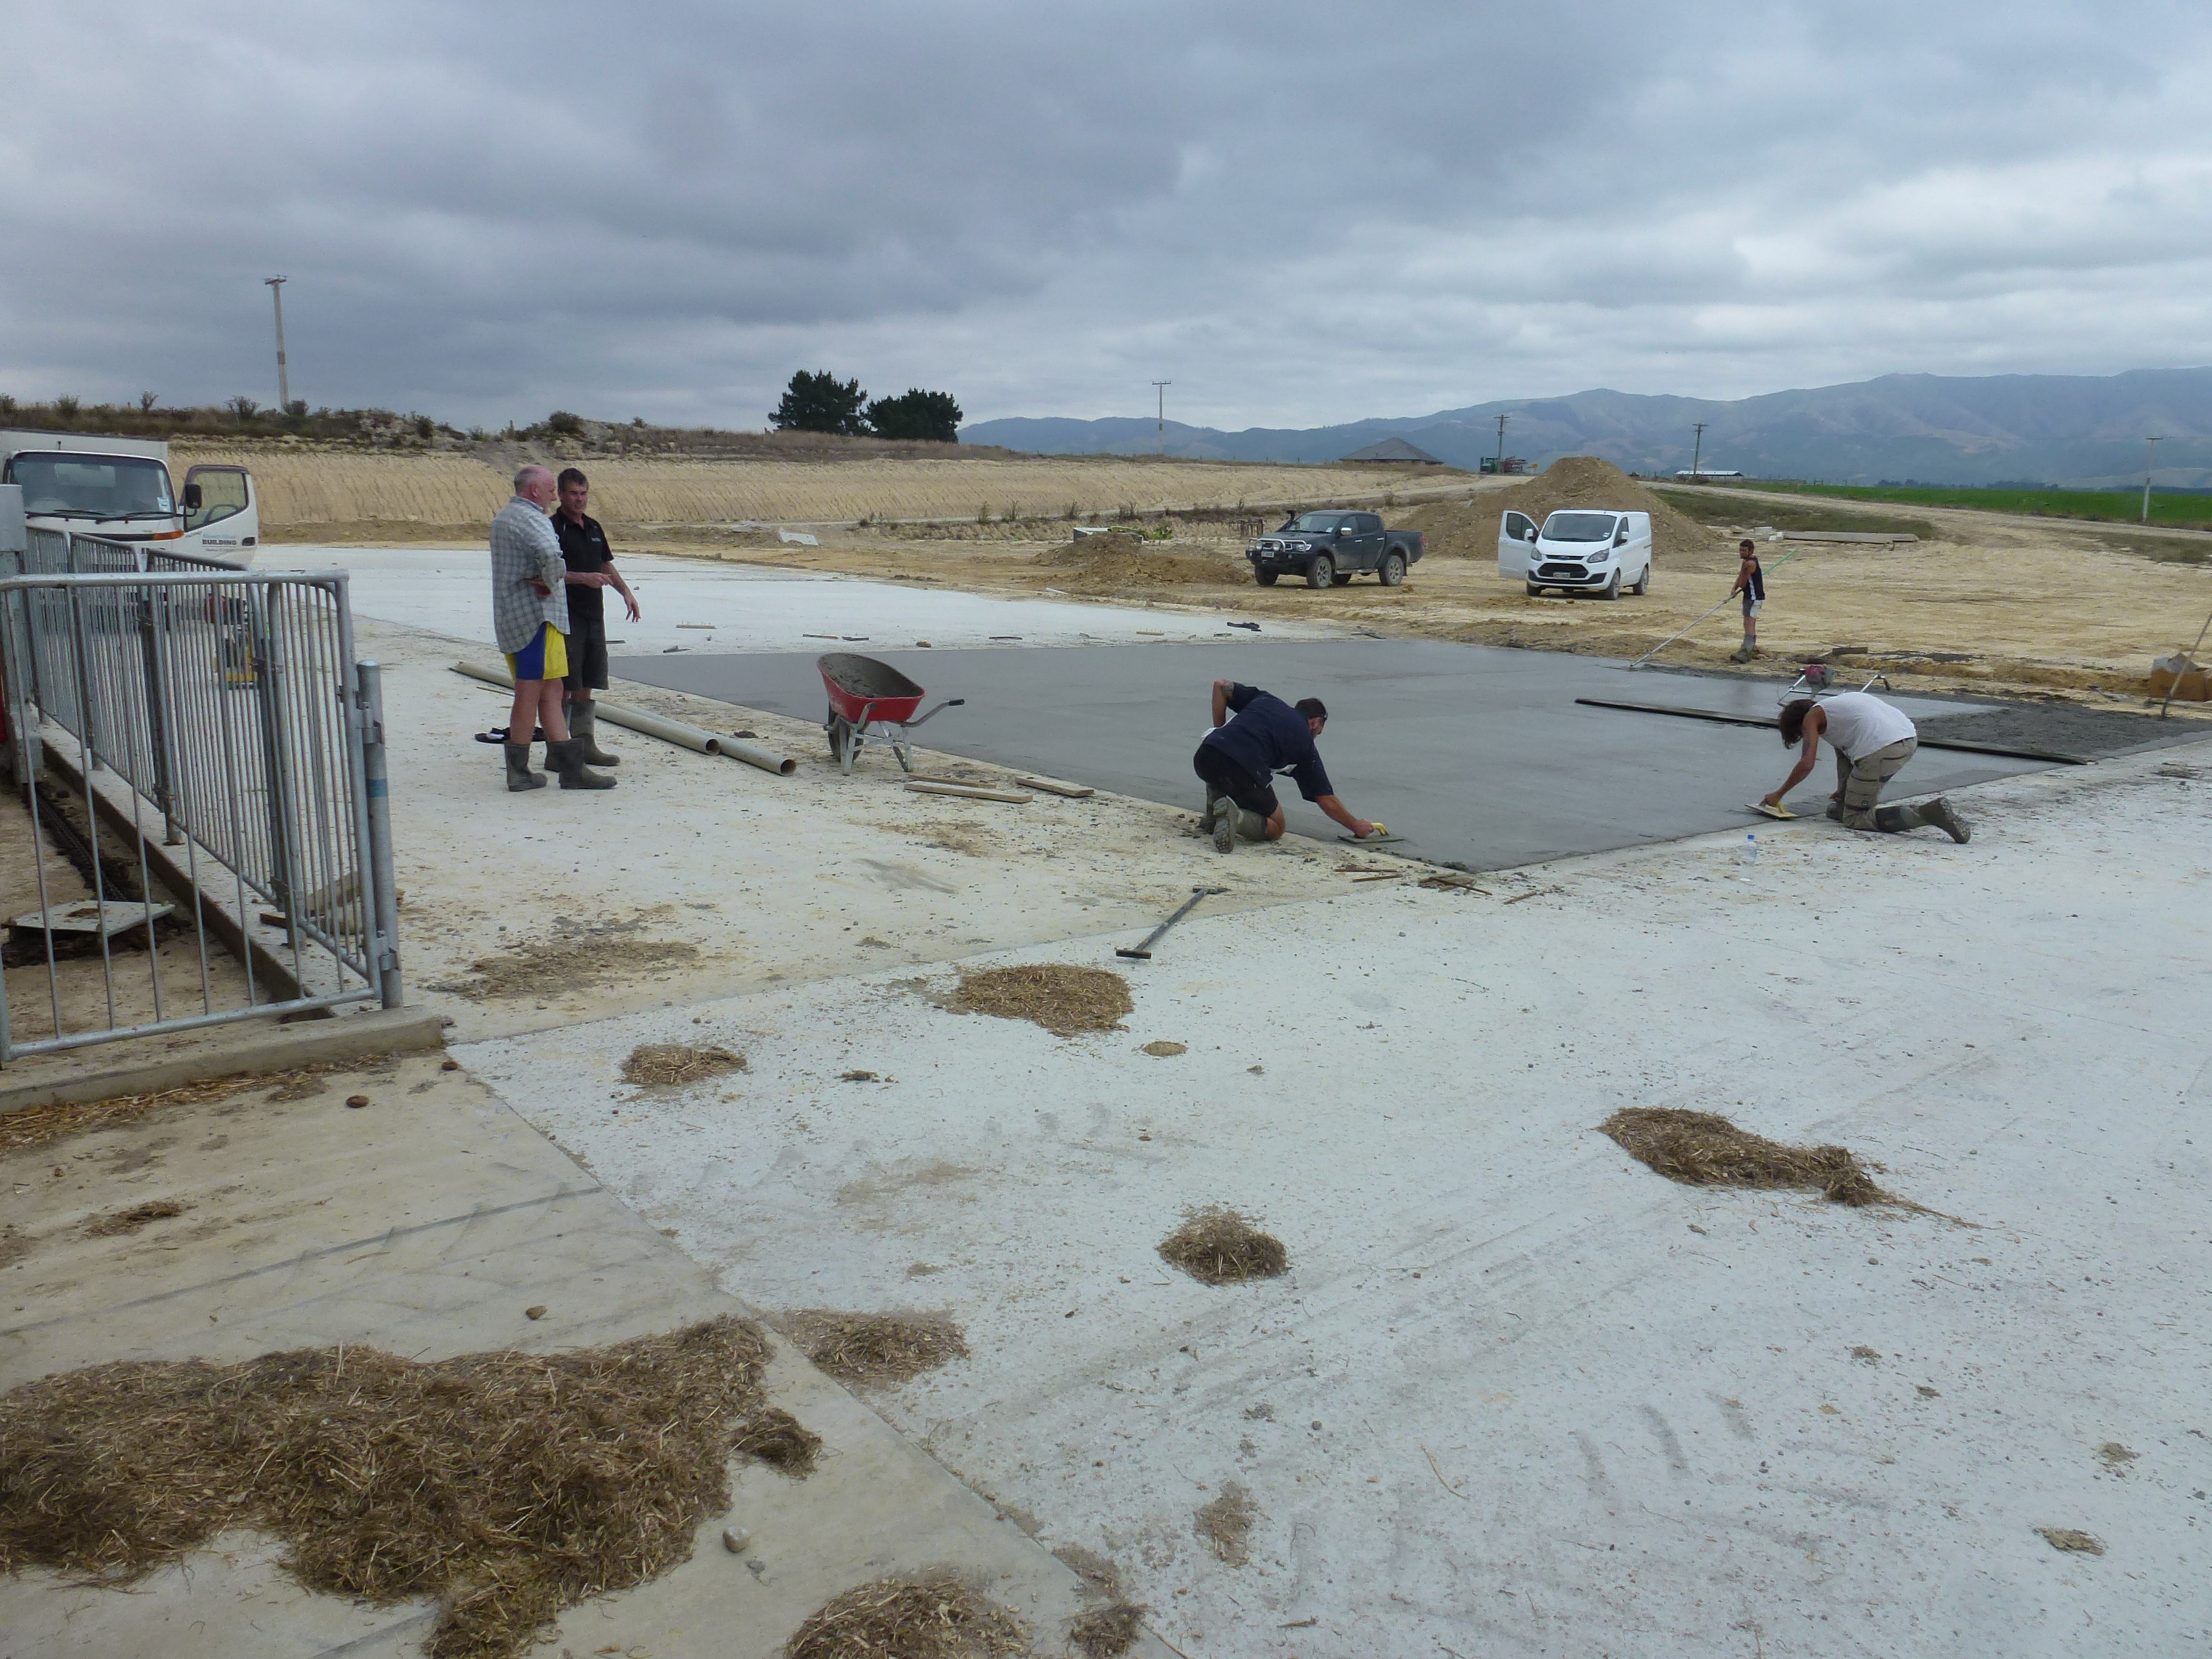 5 workers place fibre concrete on a building site in New Zealand